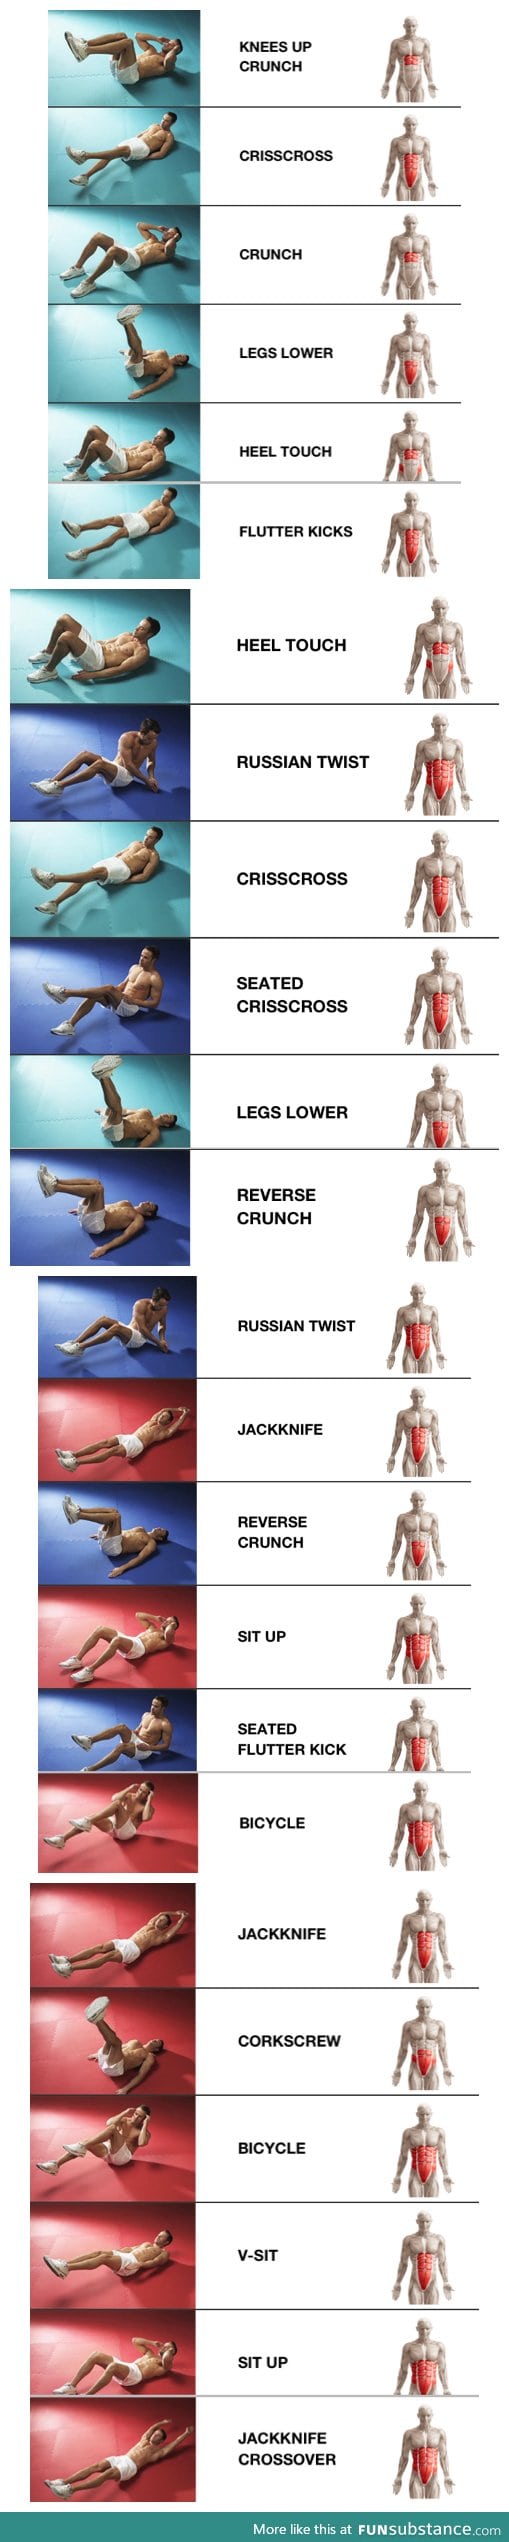 Core workouts: Easiest in light blue, hardest in red